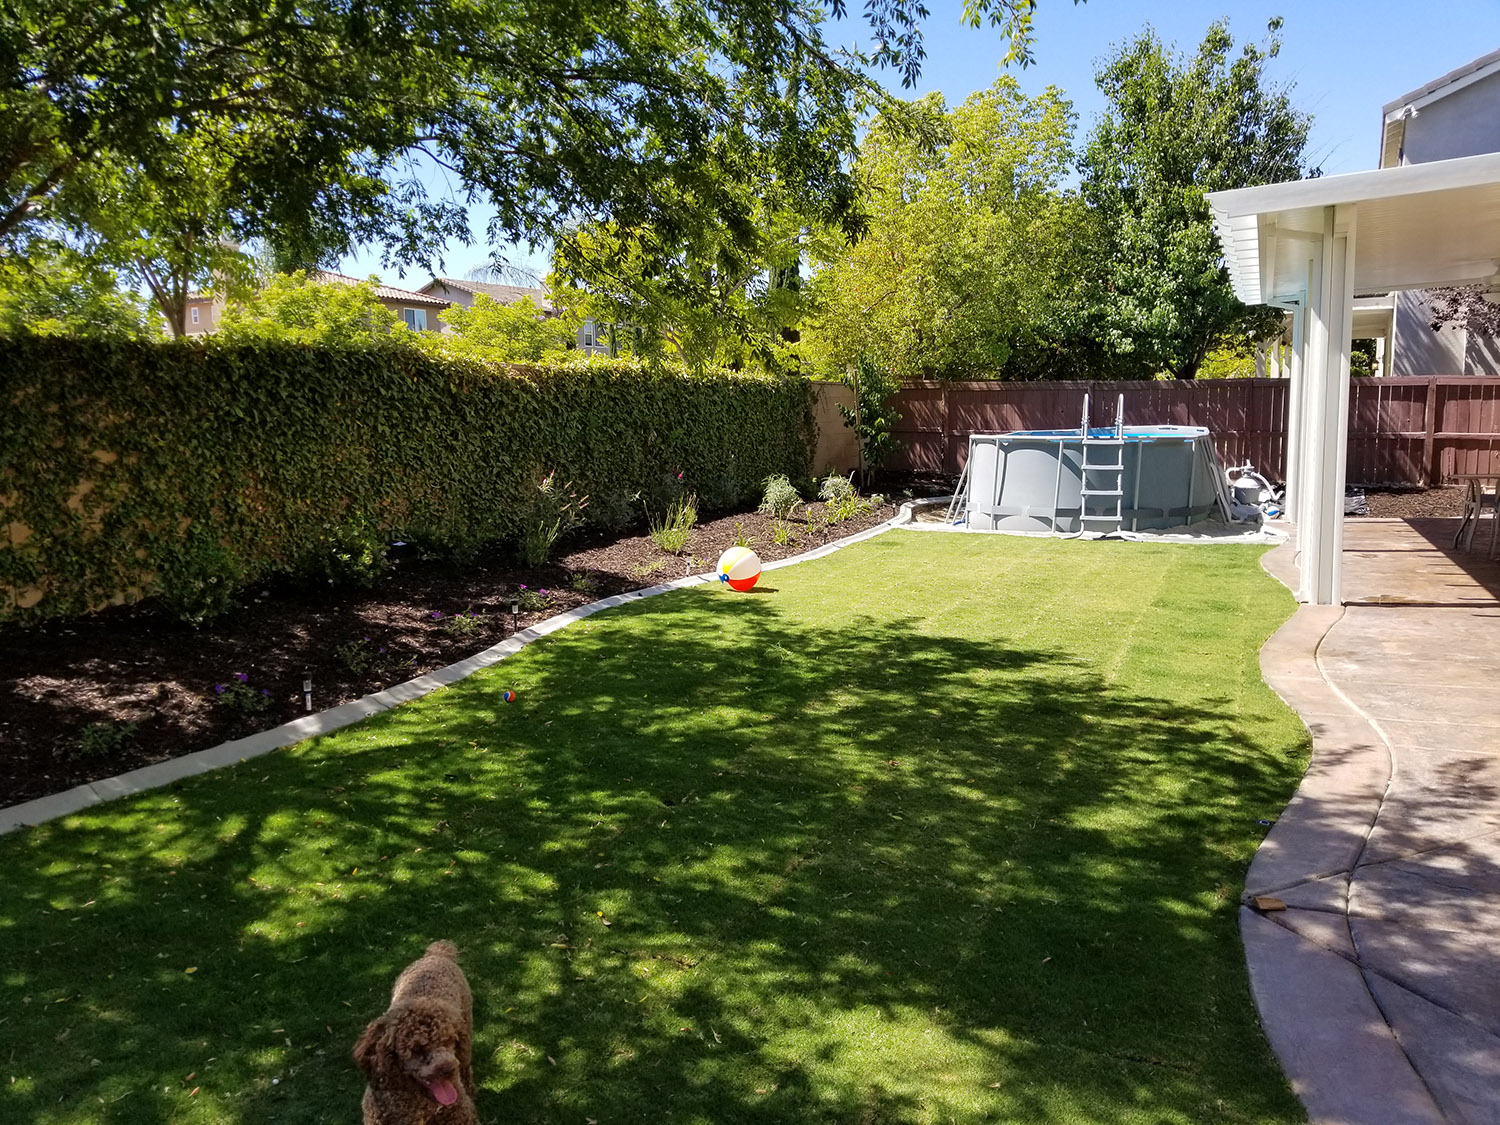 Grass, plantings and pool